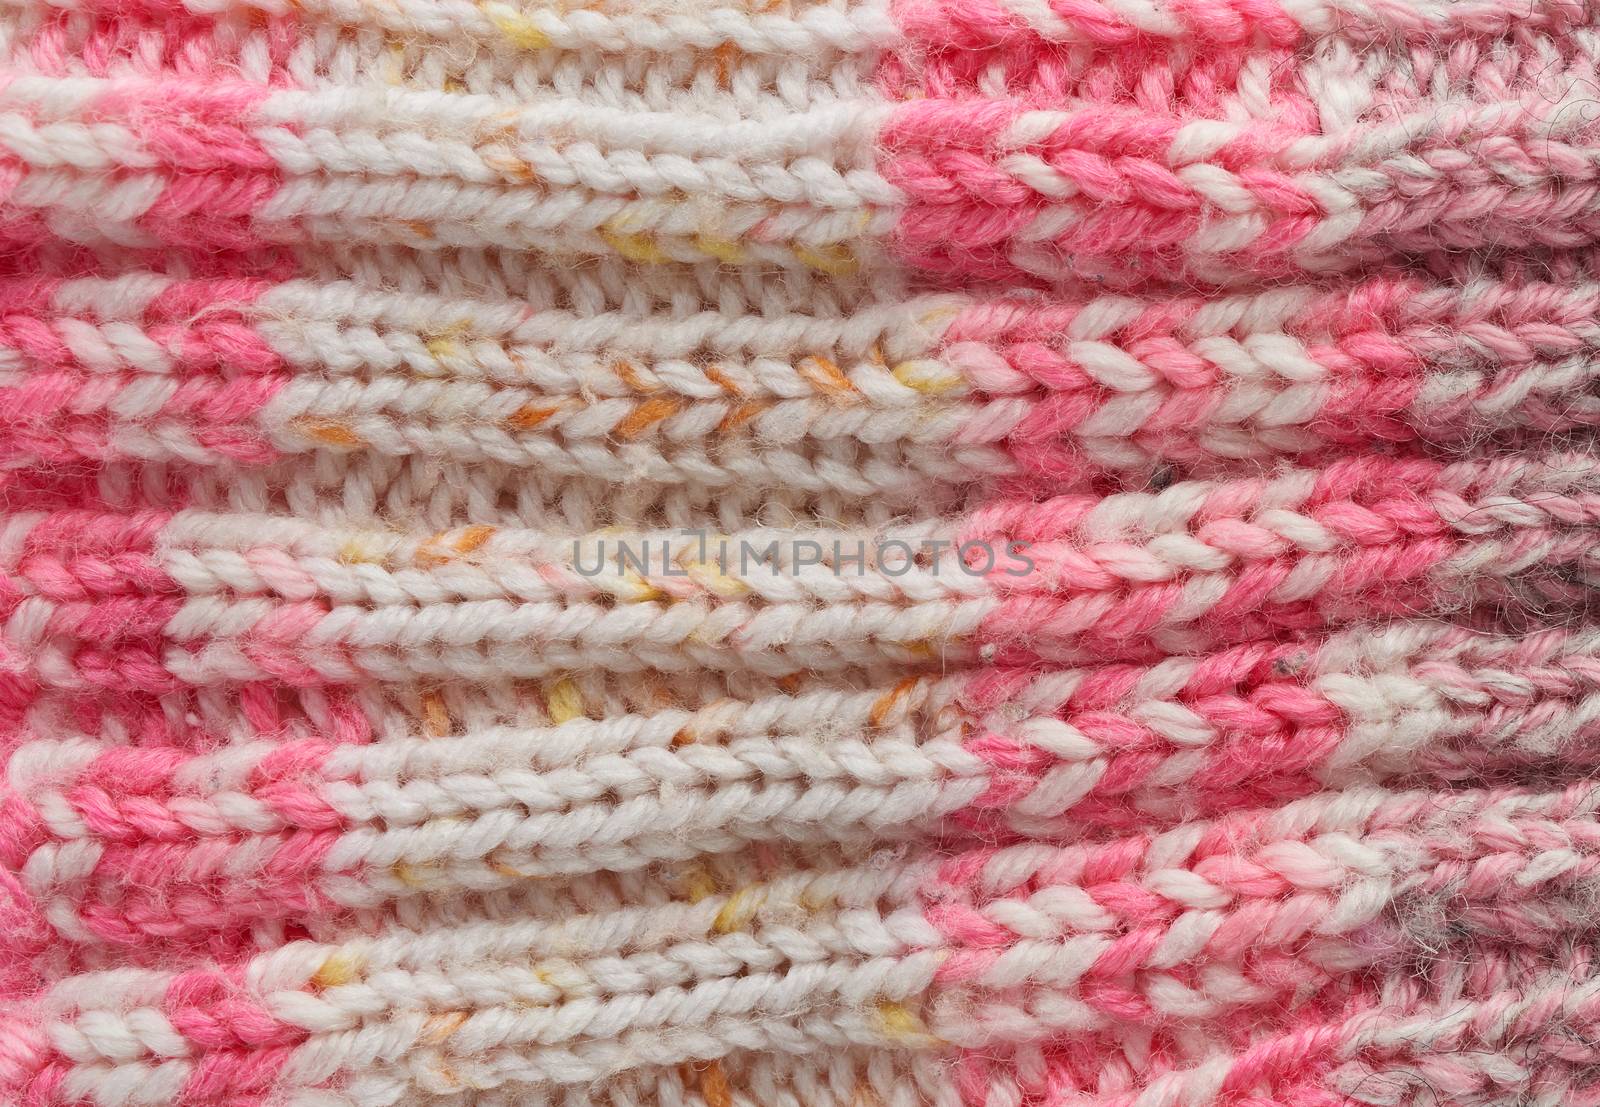 knitted pink texture, full frame, warm woolen clothes, close up